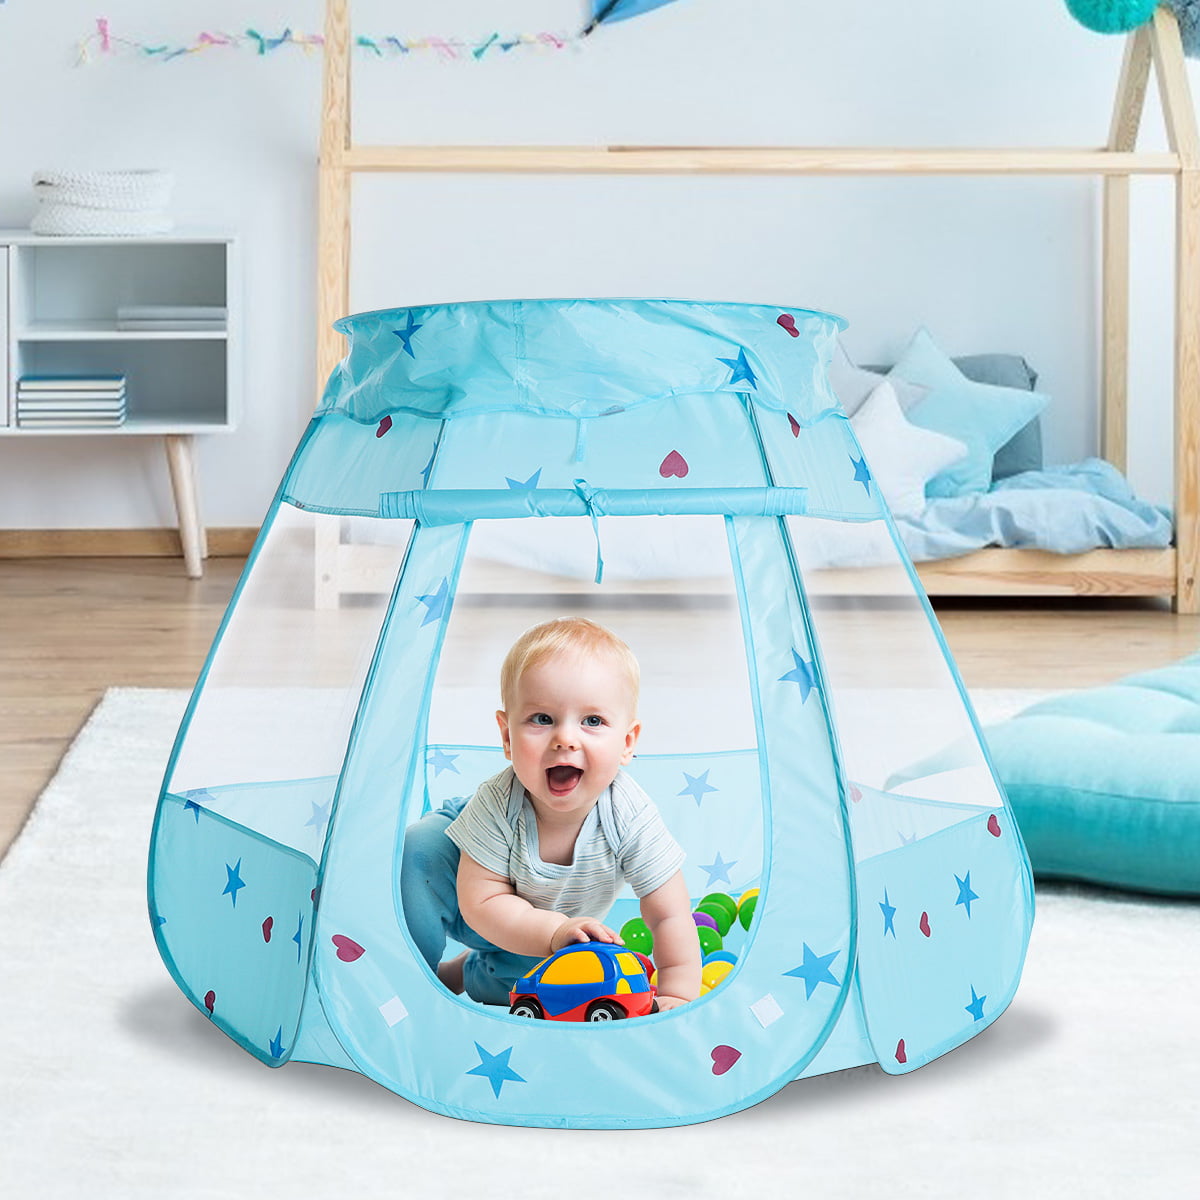 3 in 1 Kids Play Tent with Crawl Tunnel Foldable Indoor Outdoor 